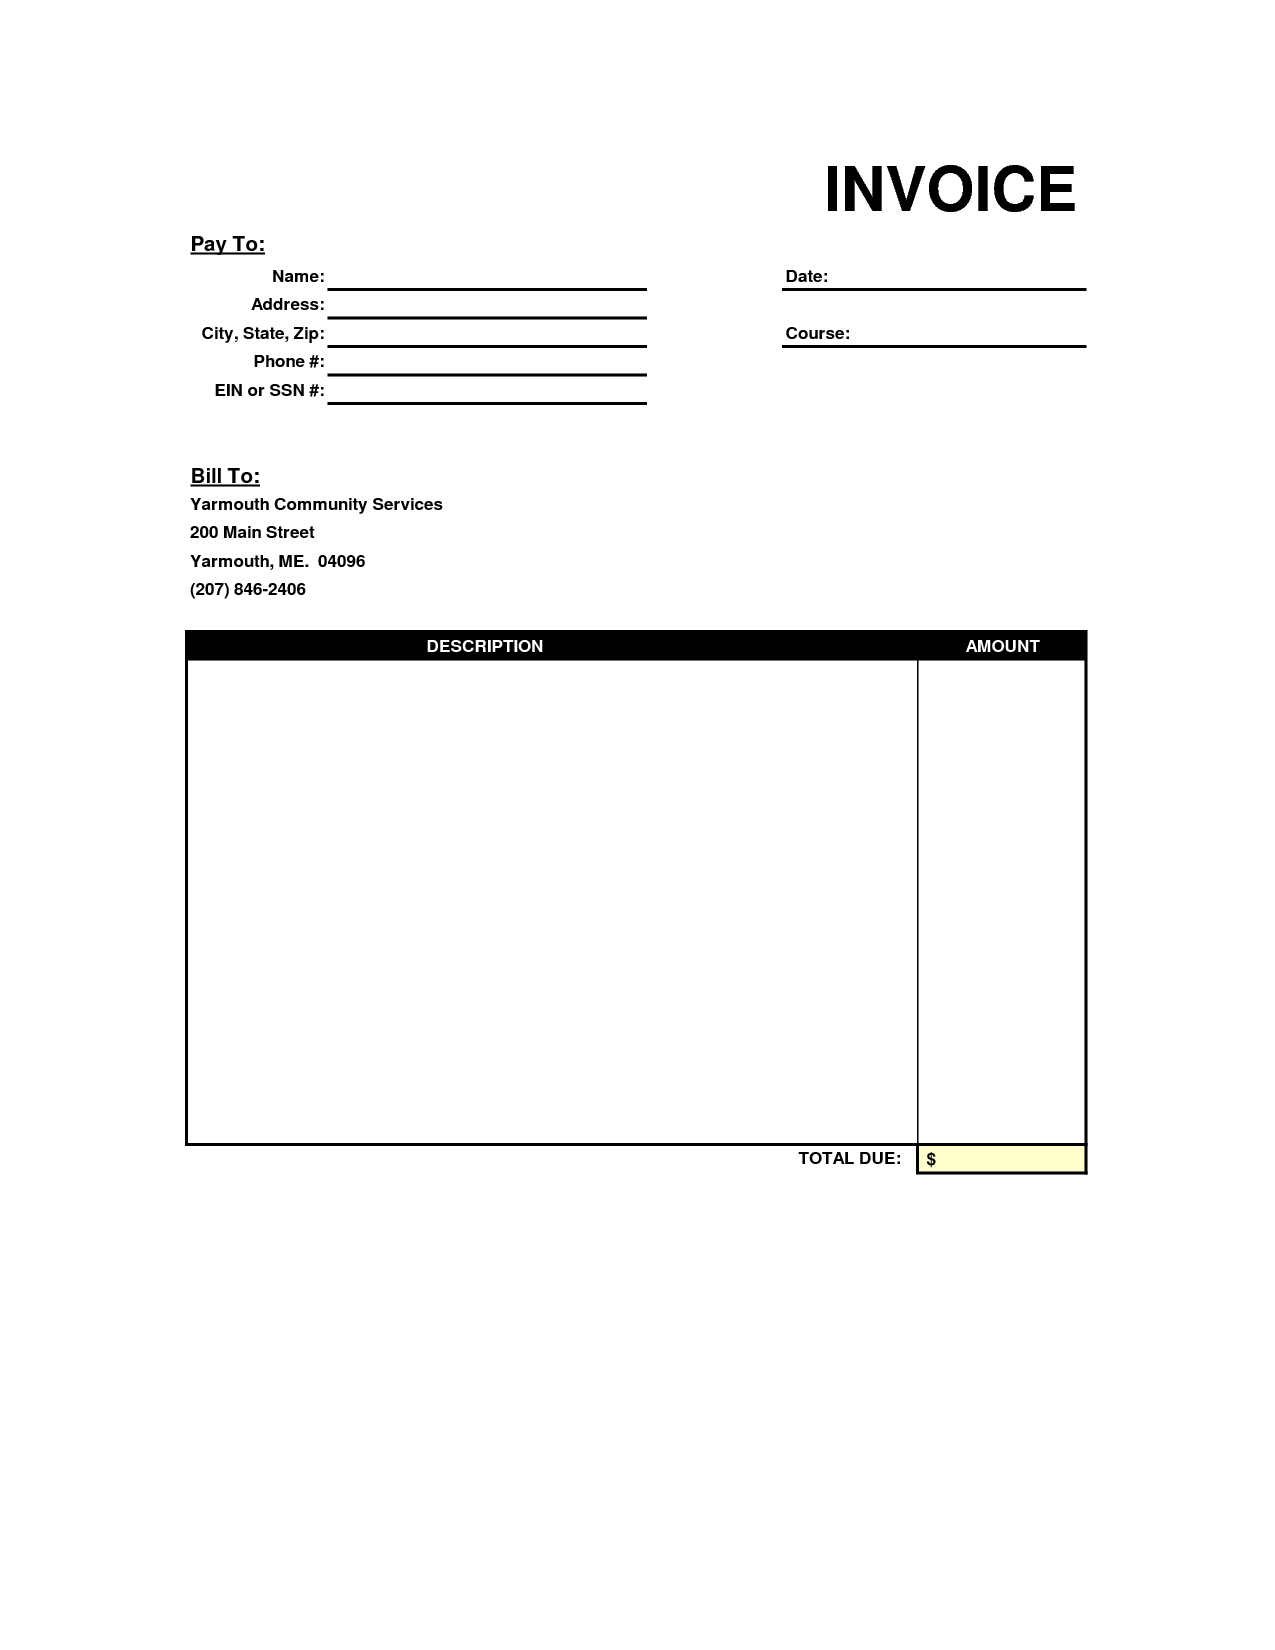 Blank Invoice Template Free | Free Business Template